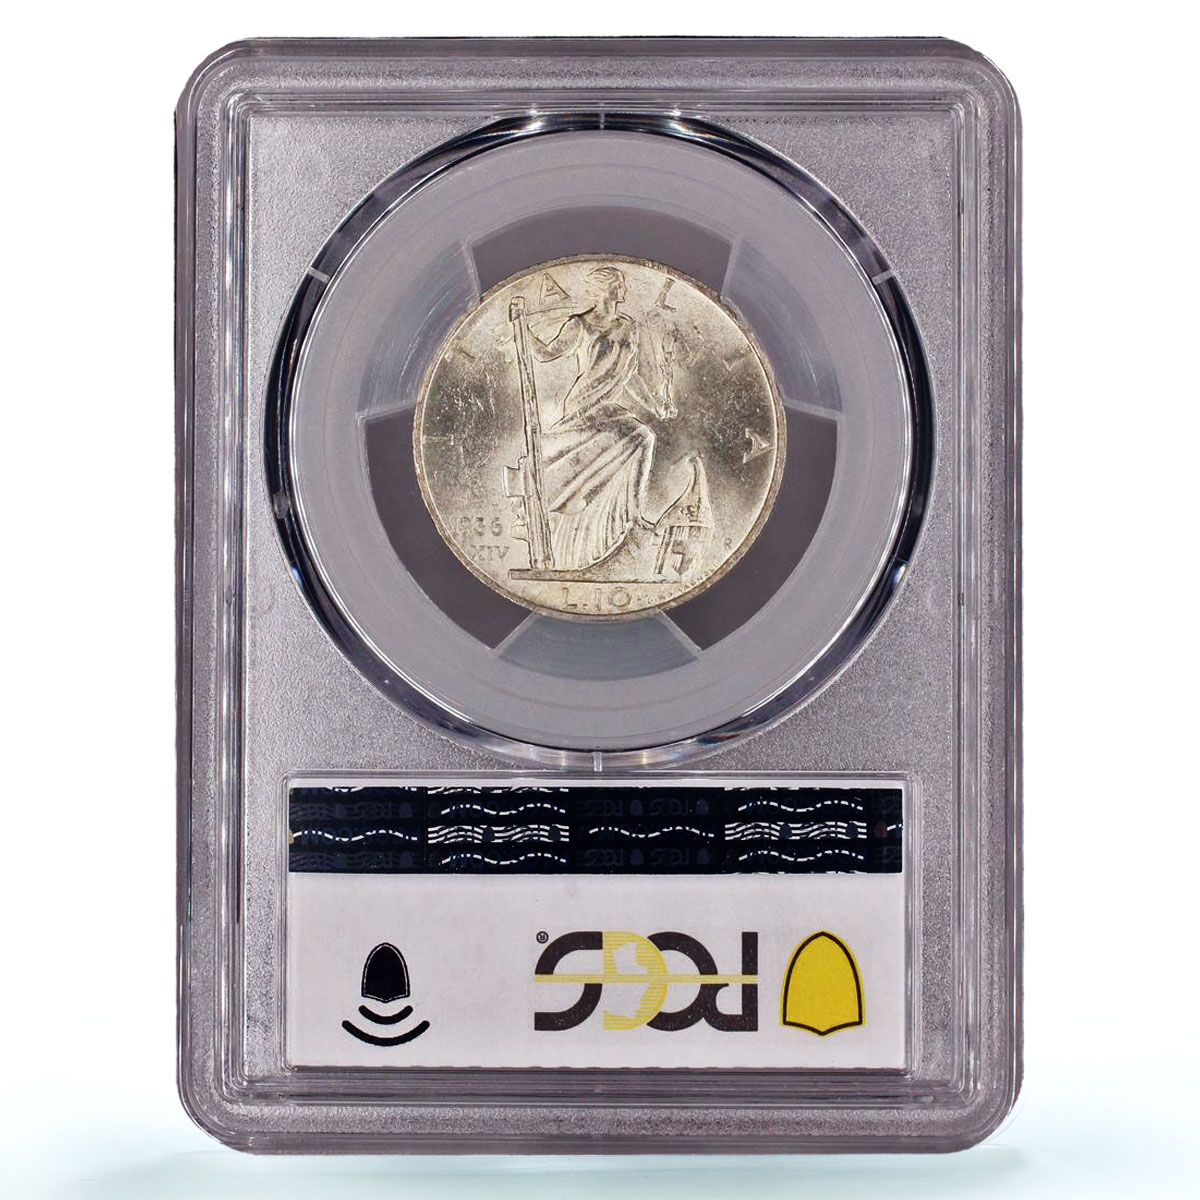 Italy 10 lire Emanuele III Coinage Year XIV KM-80 MS62 PCGS silver coin 1936